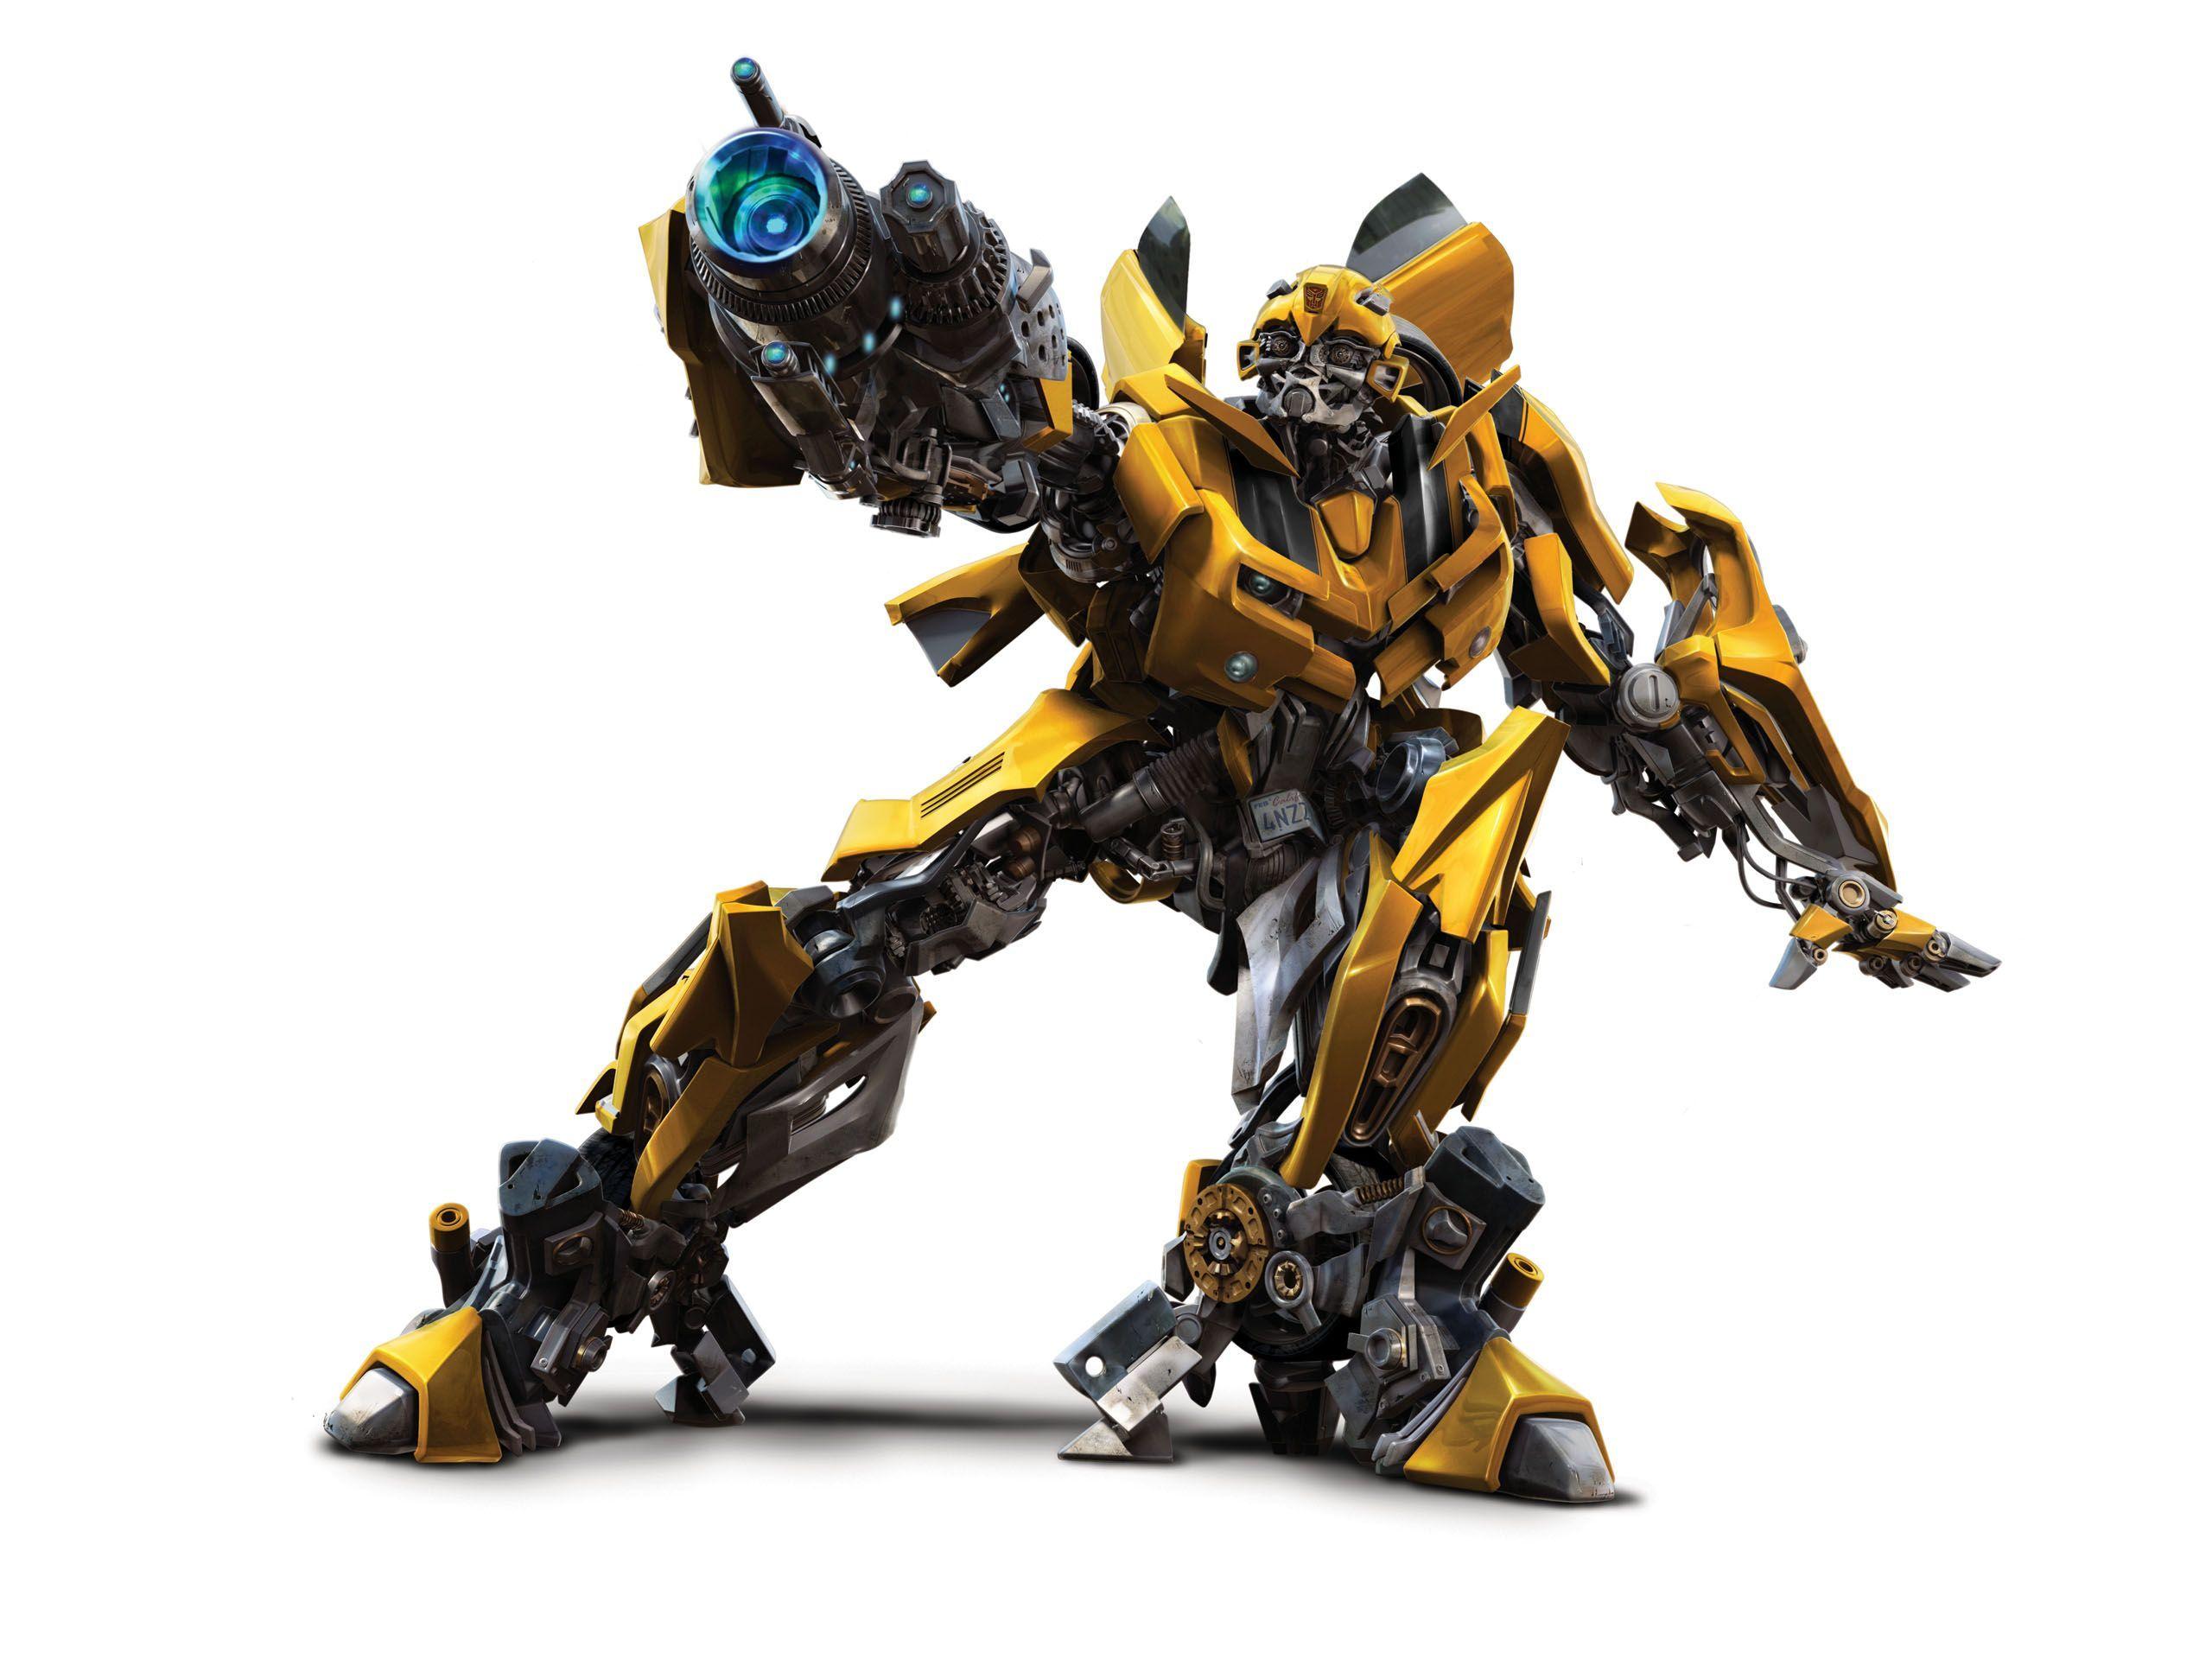 Transformers Bumble Bee 11942 HD Wallpaper Picture. Top